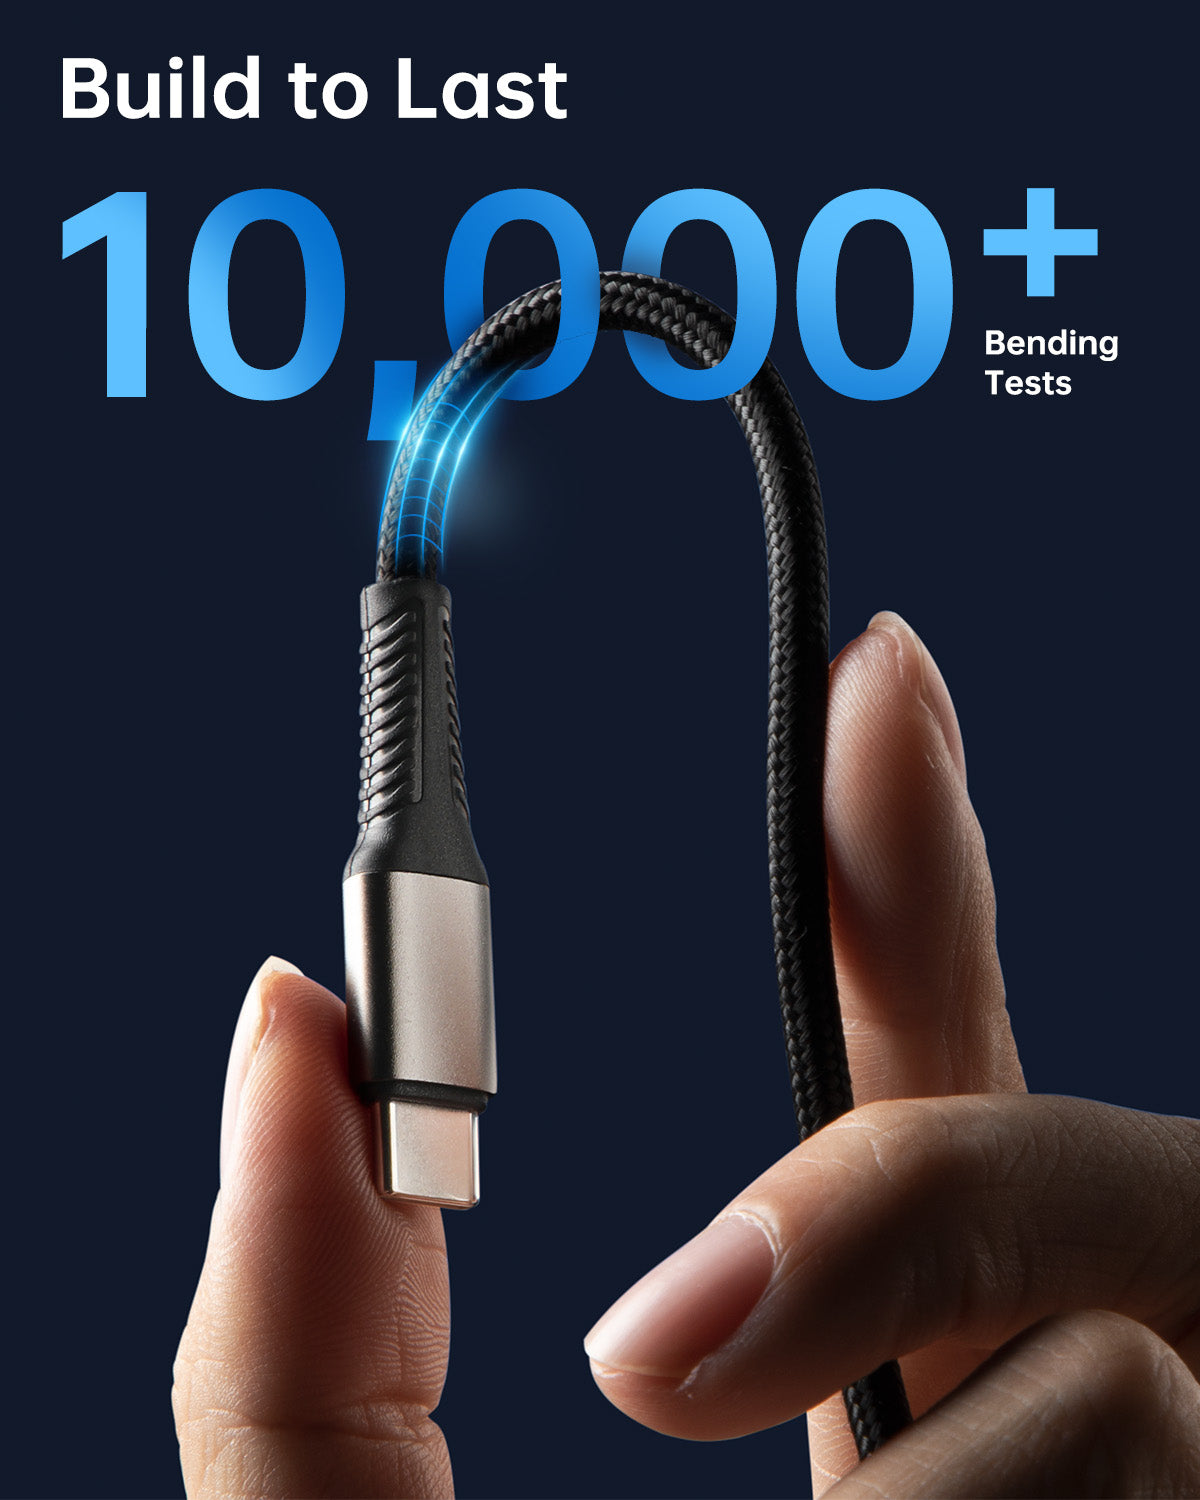 Fast Charging Nylon Cables